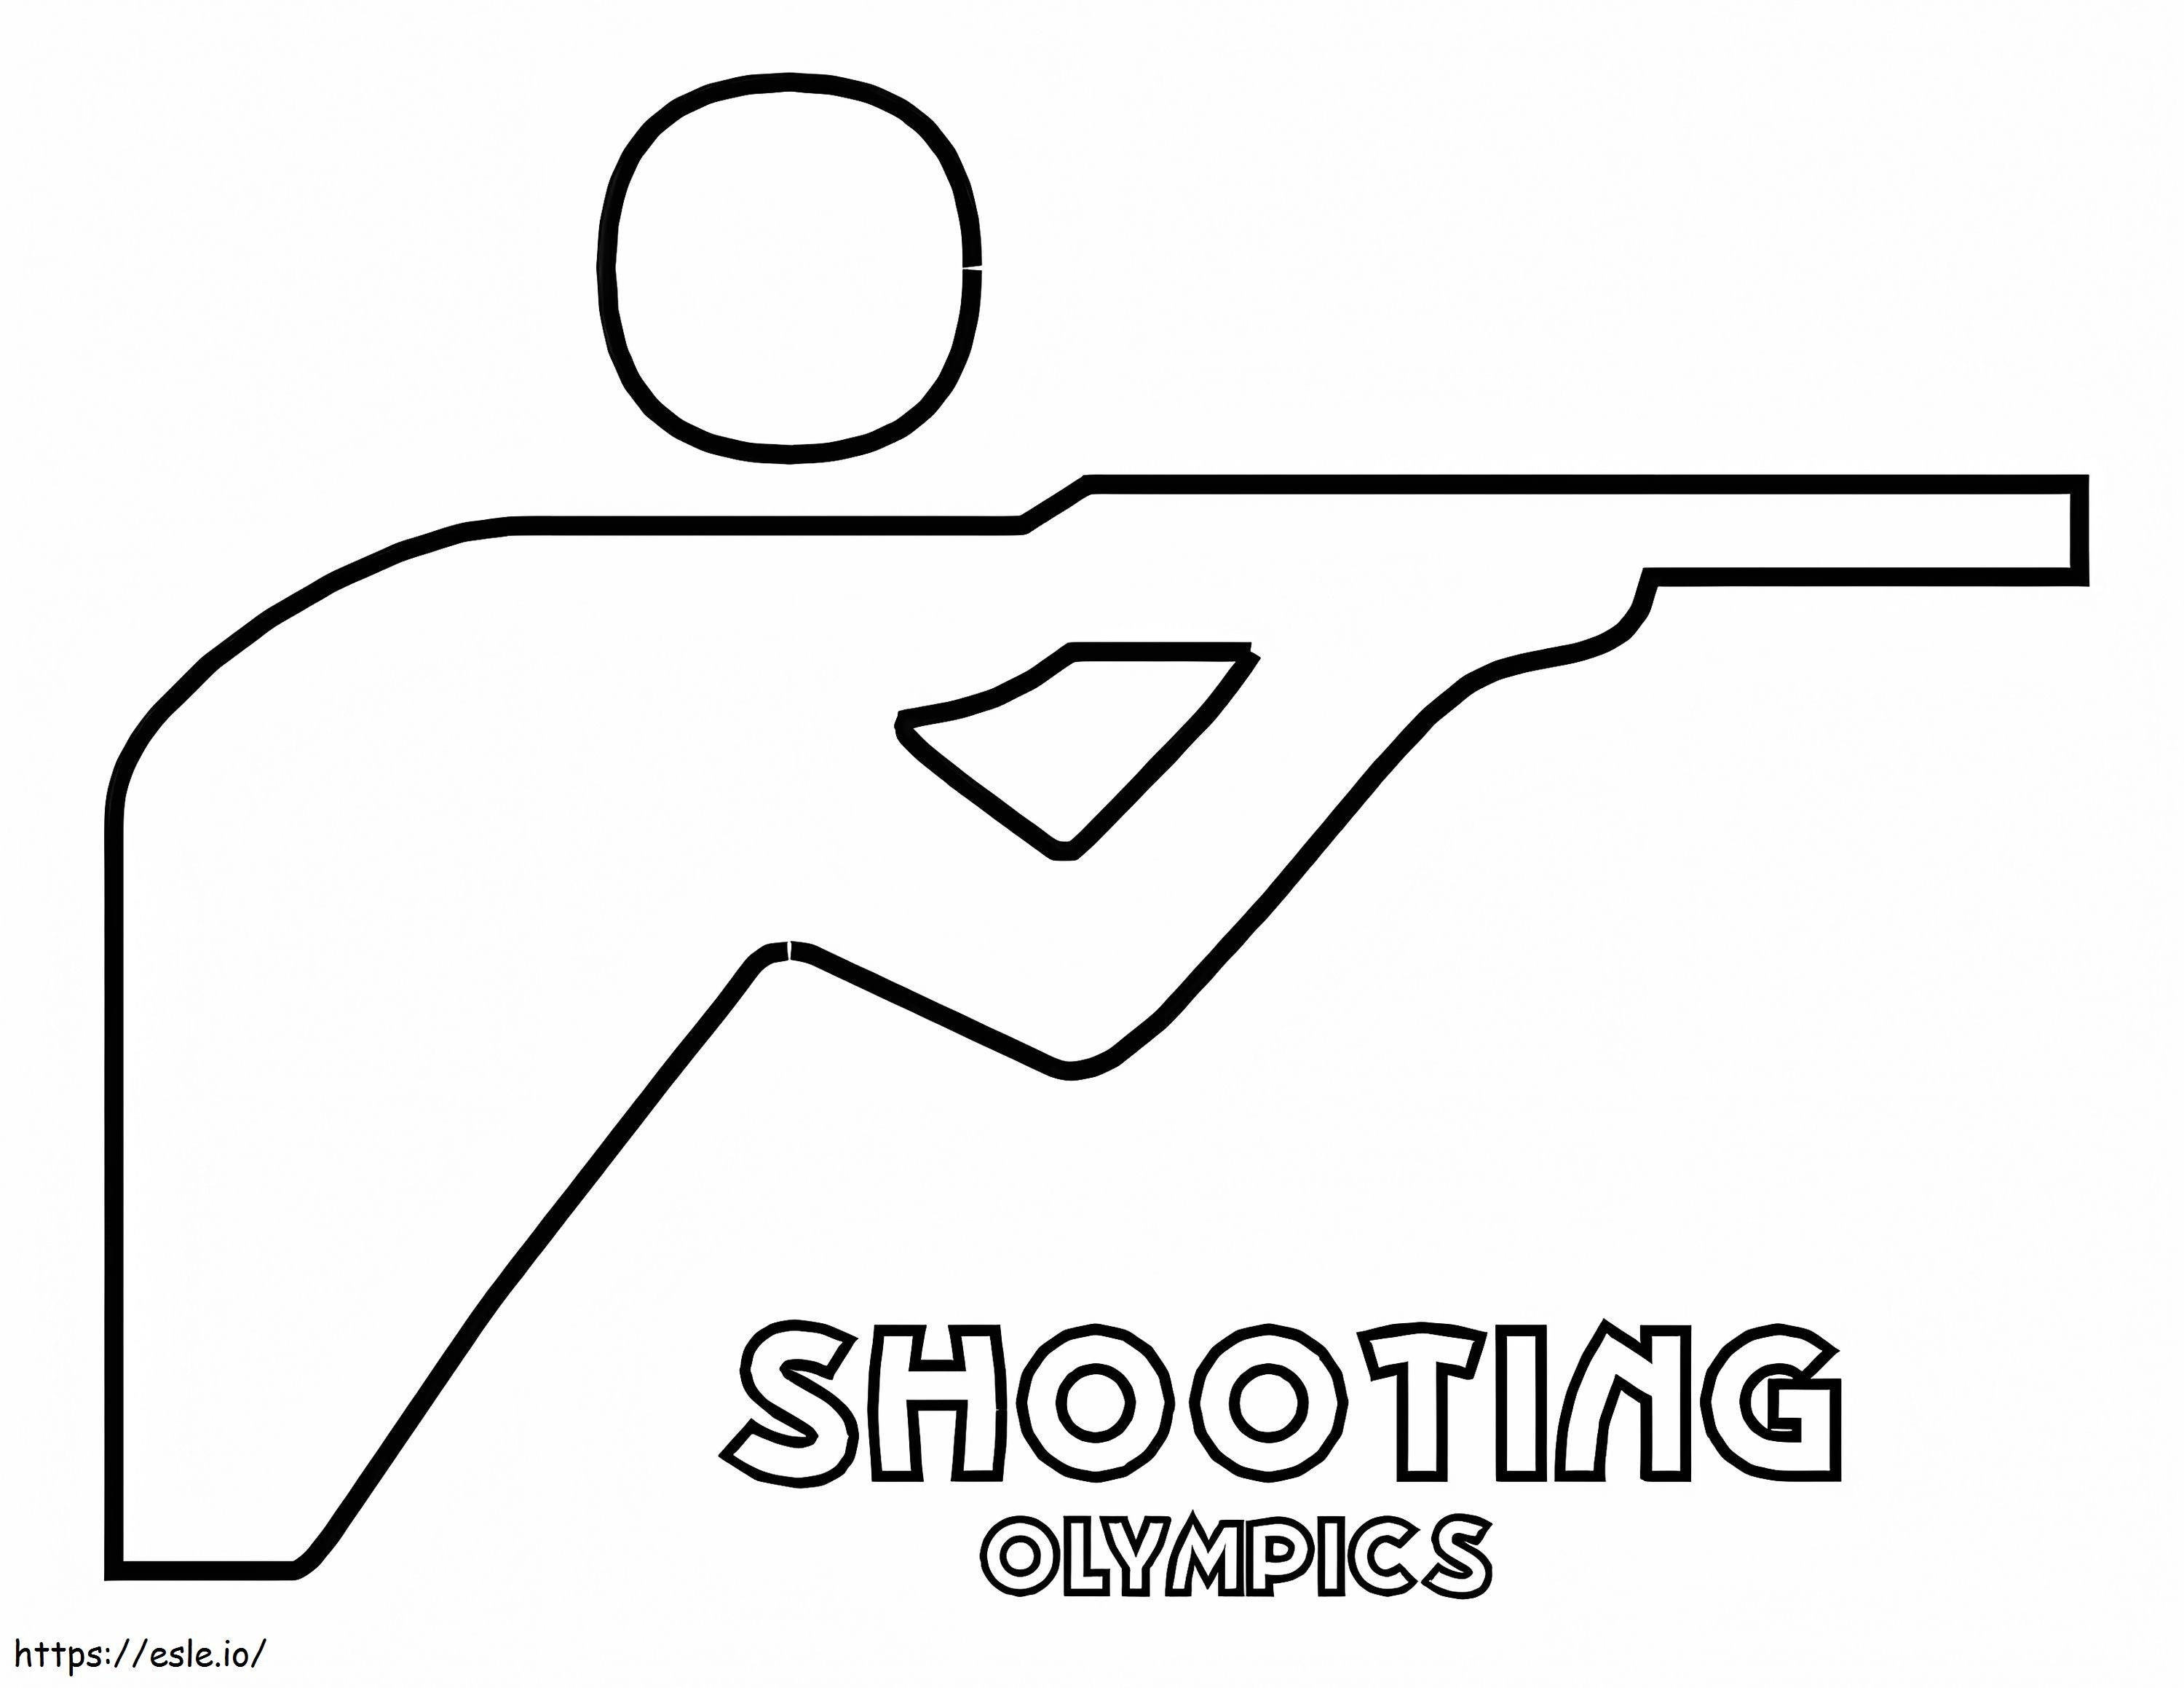 Olympics Shooting coloring page